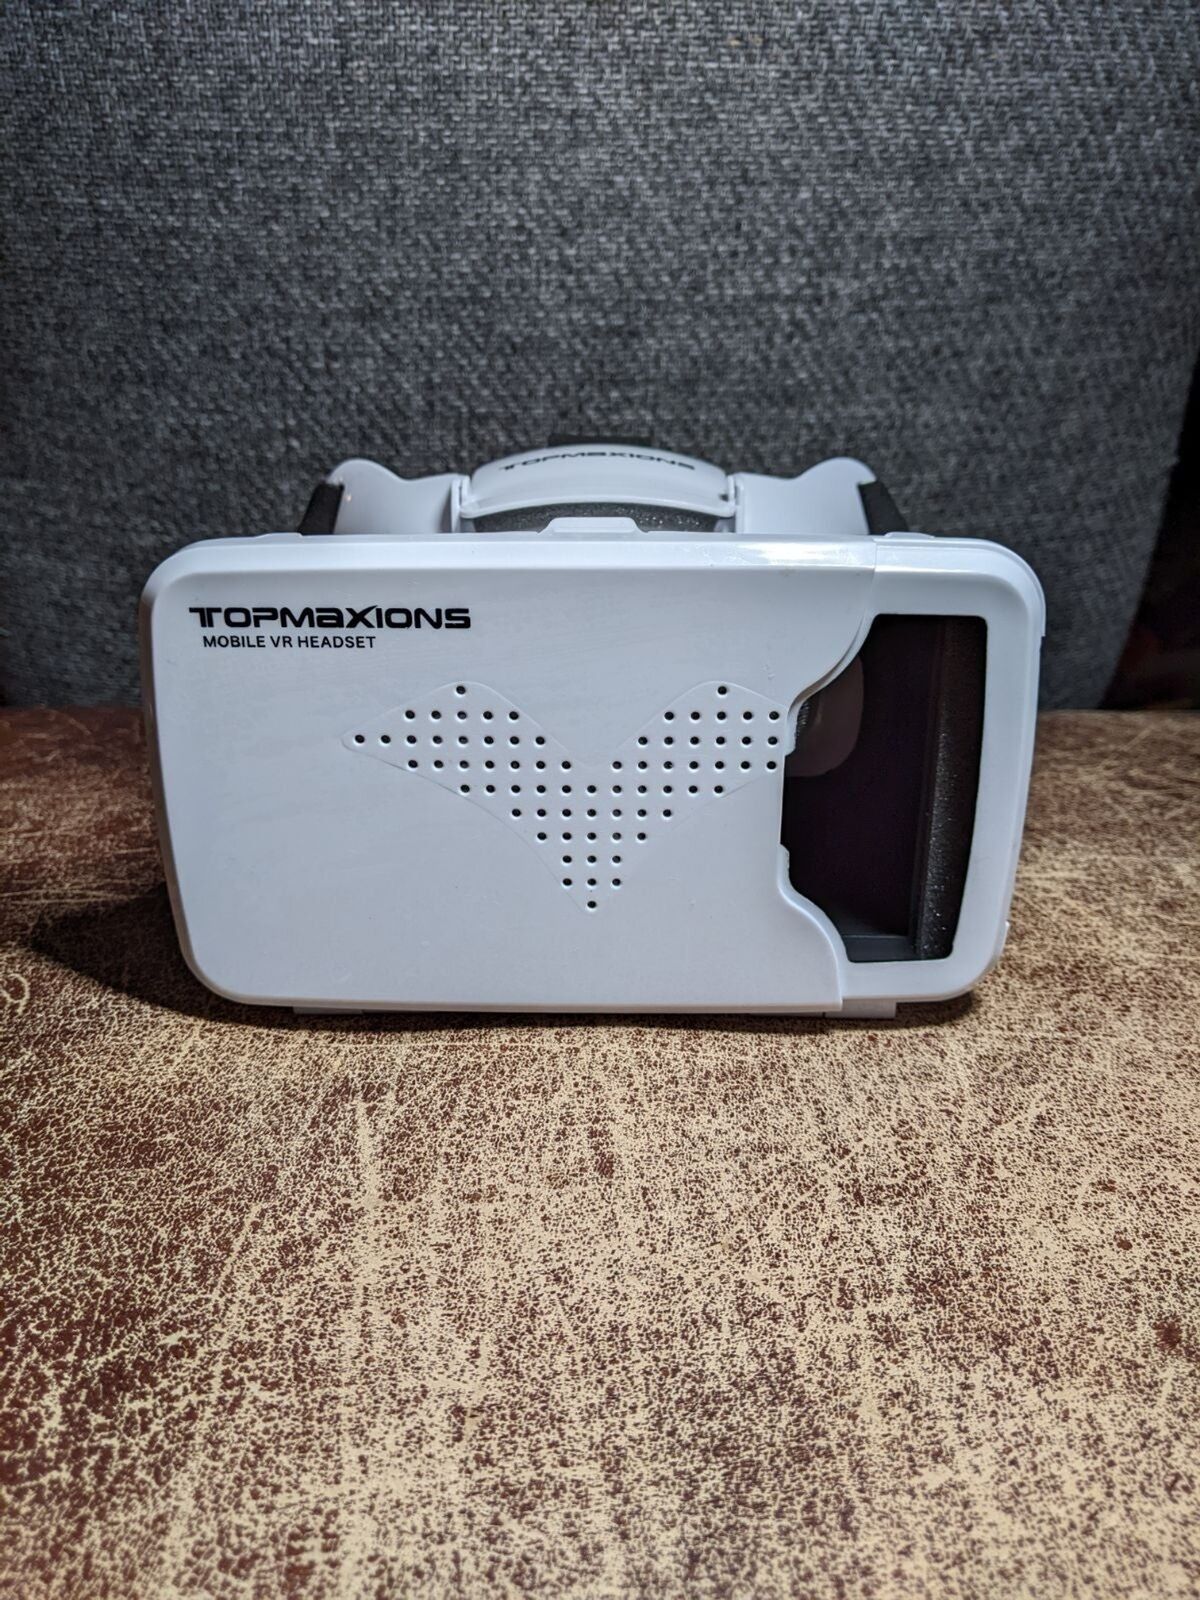 Topmaxions Mobile VR Headset